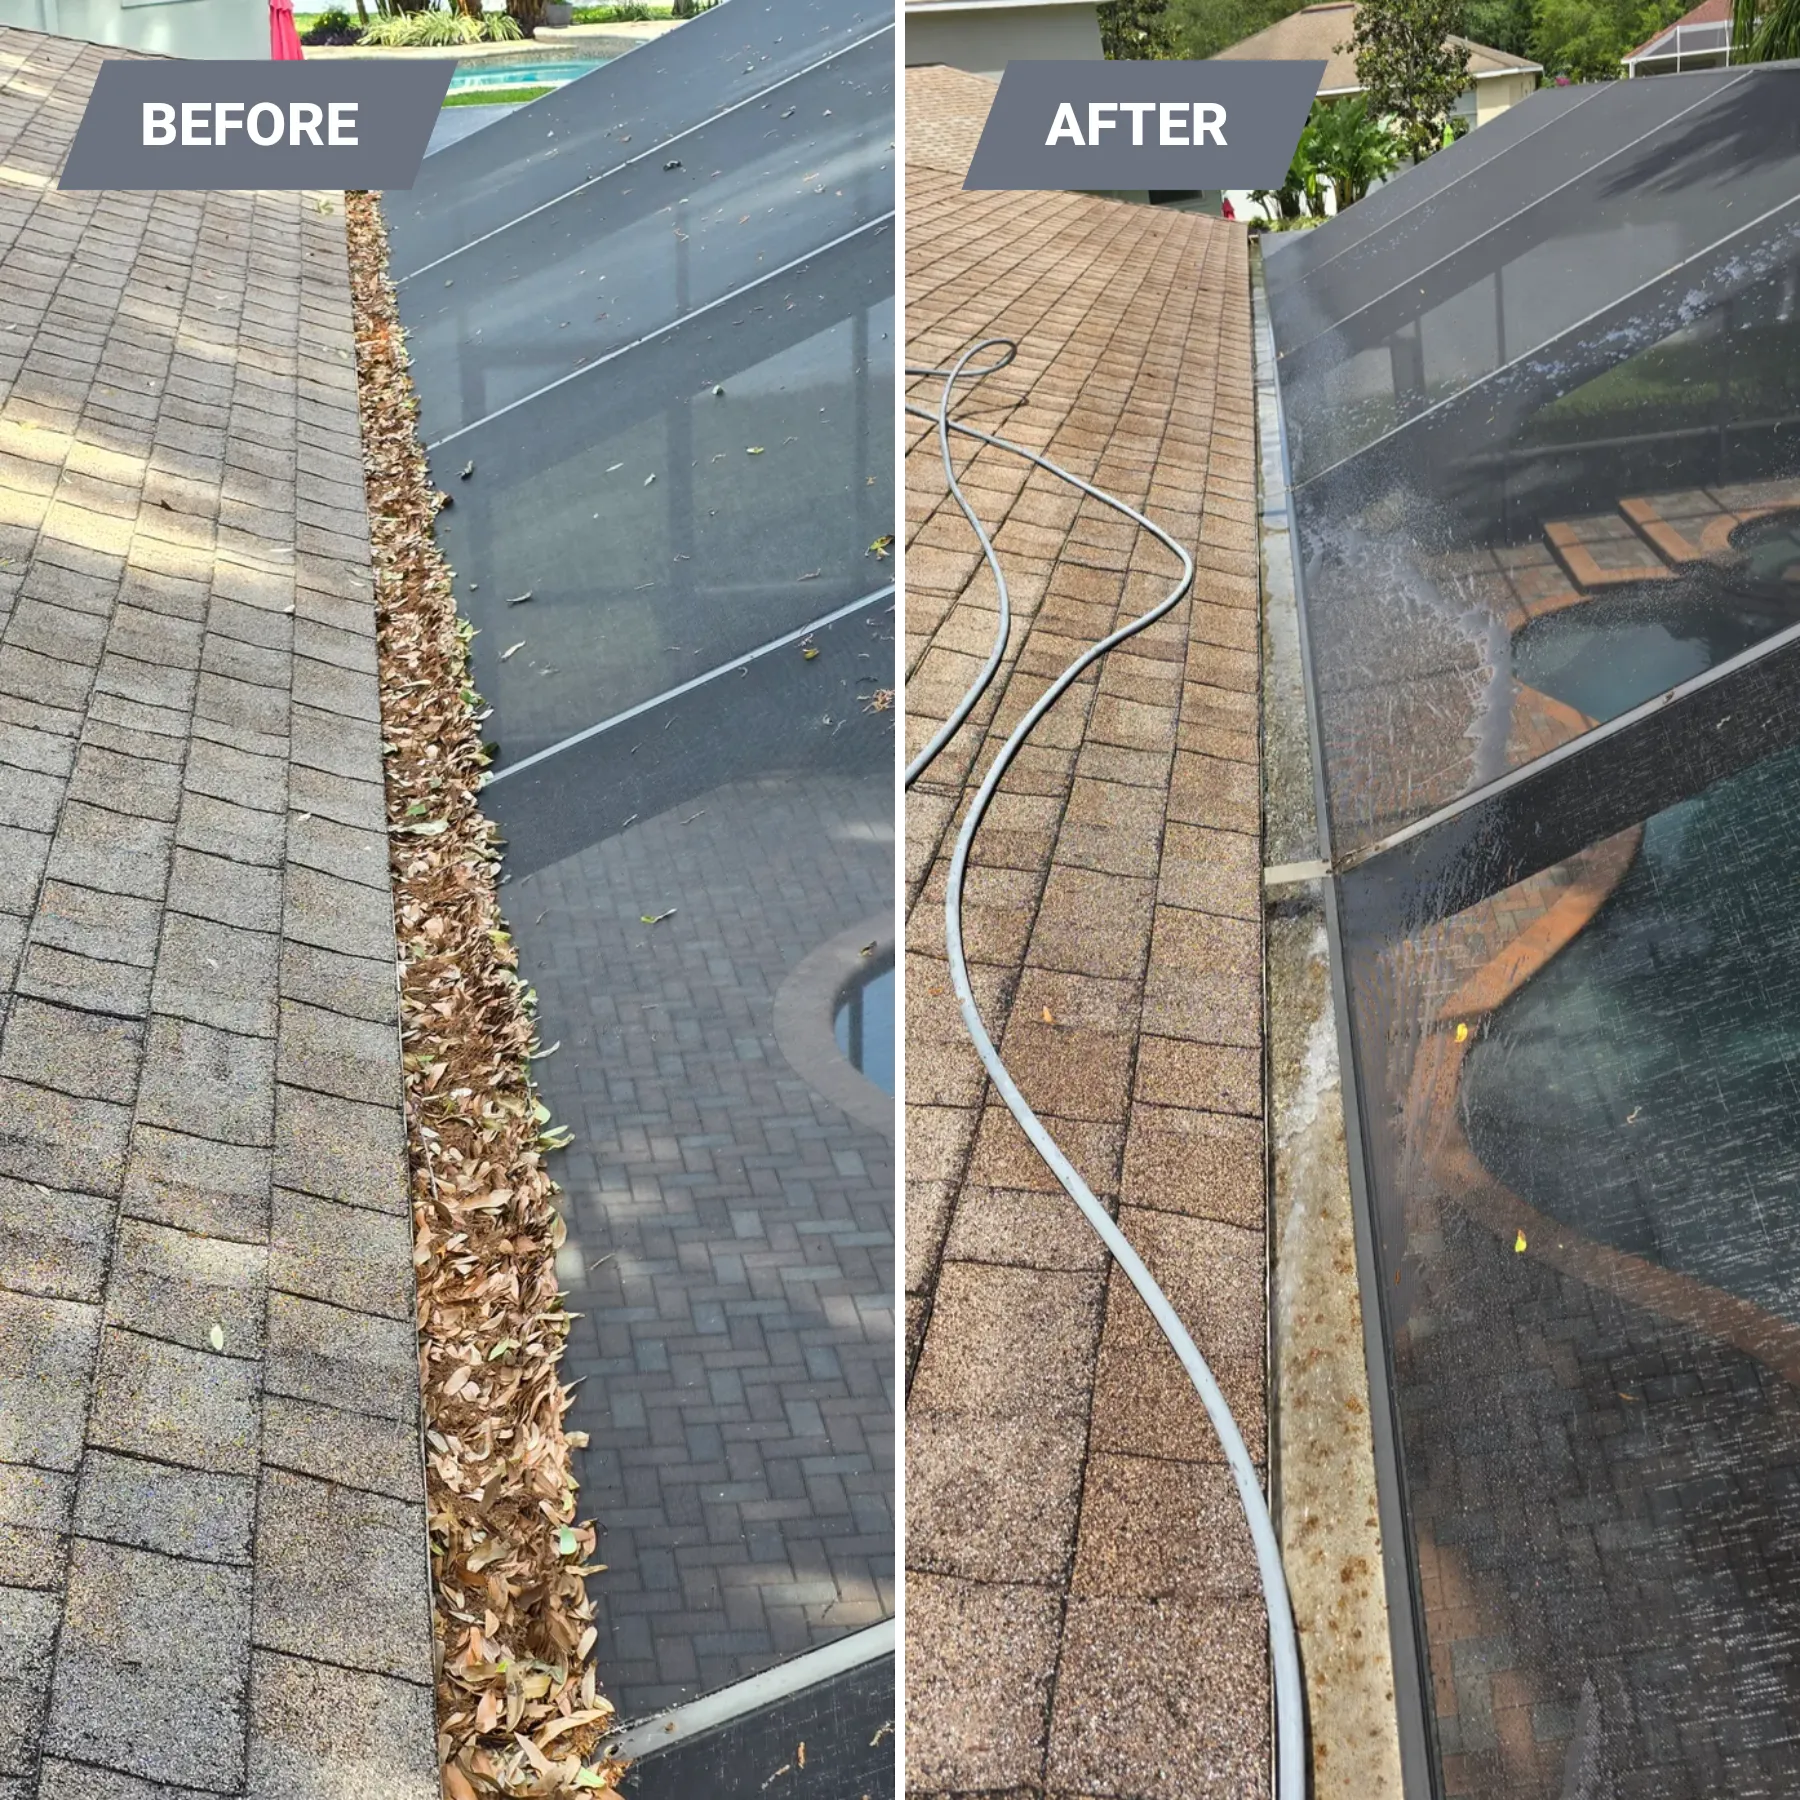 HOA Common Areas Pressure Washing for Blue Stream Roof Cleaning & Pressure Washing  in Dover, FL